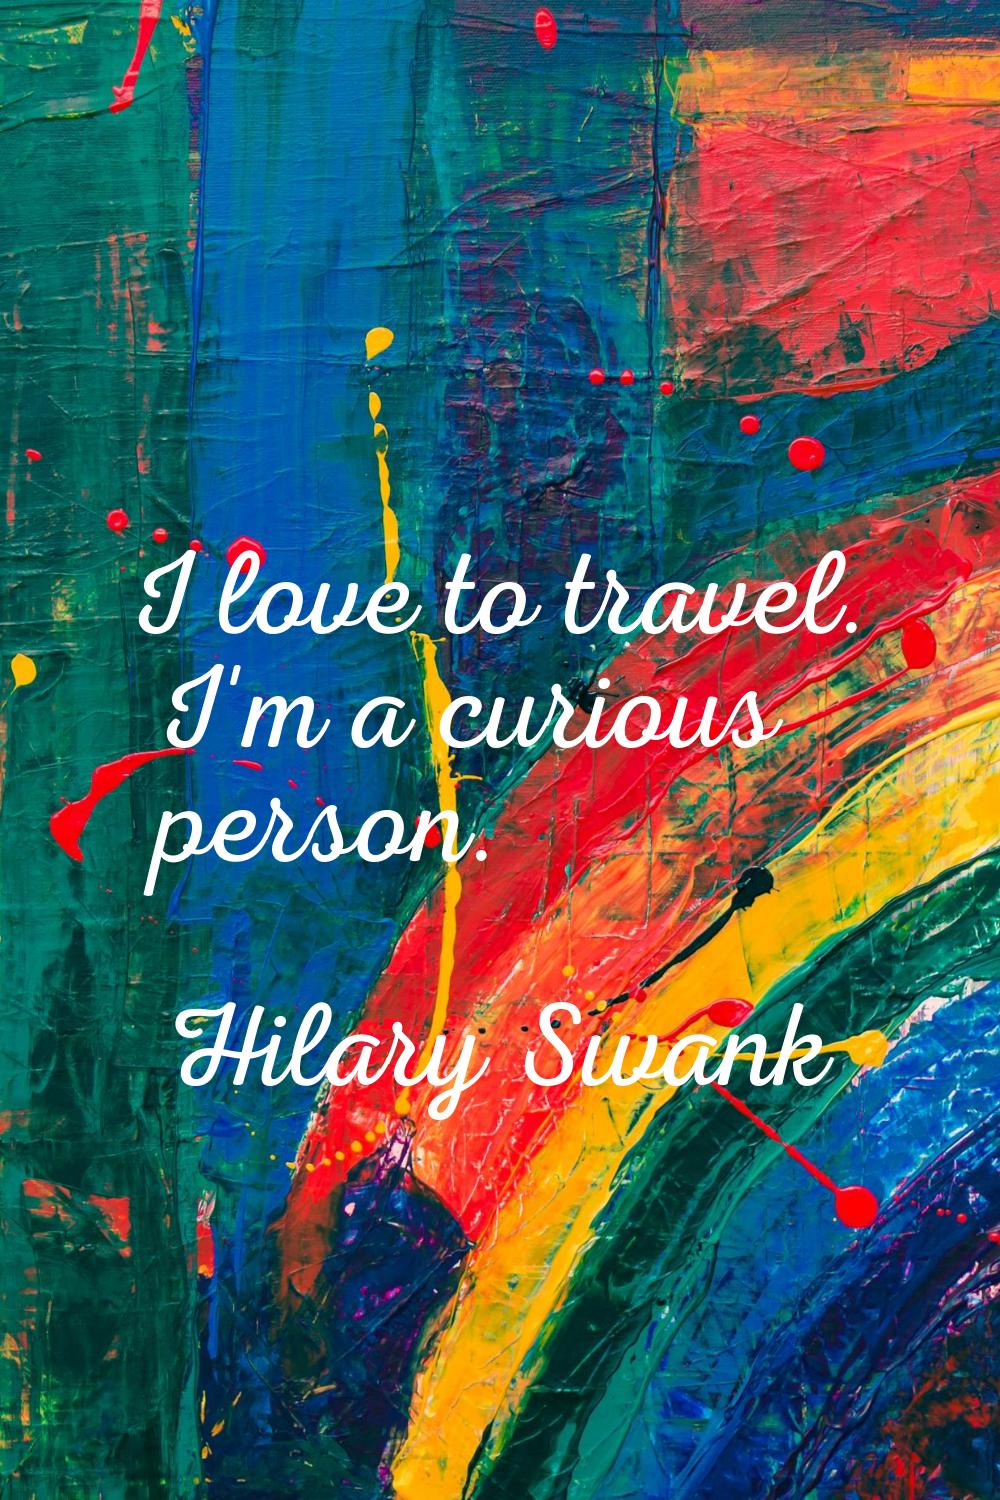 I love to travel. I'm a curious person.